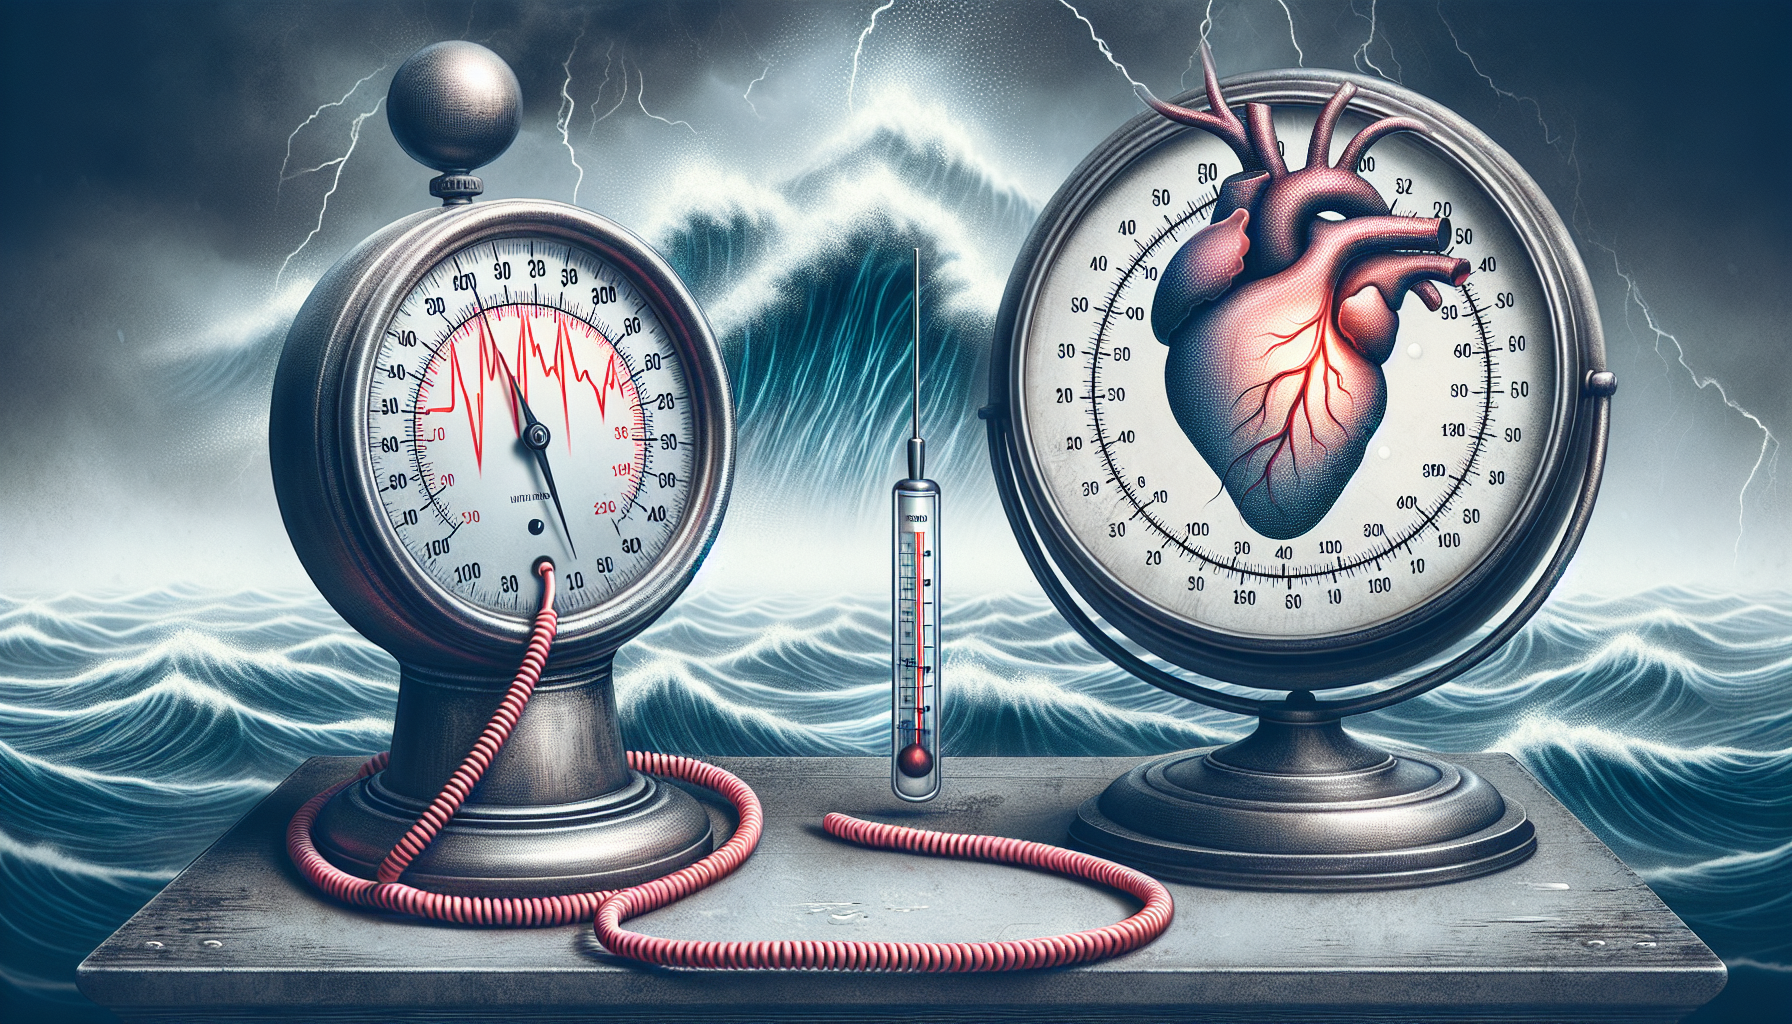 Illustration of irregular heartbeat and blood pressure fluctuations